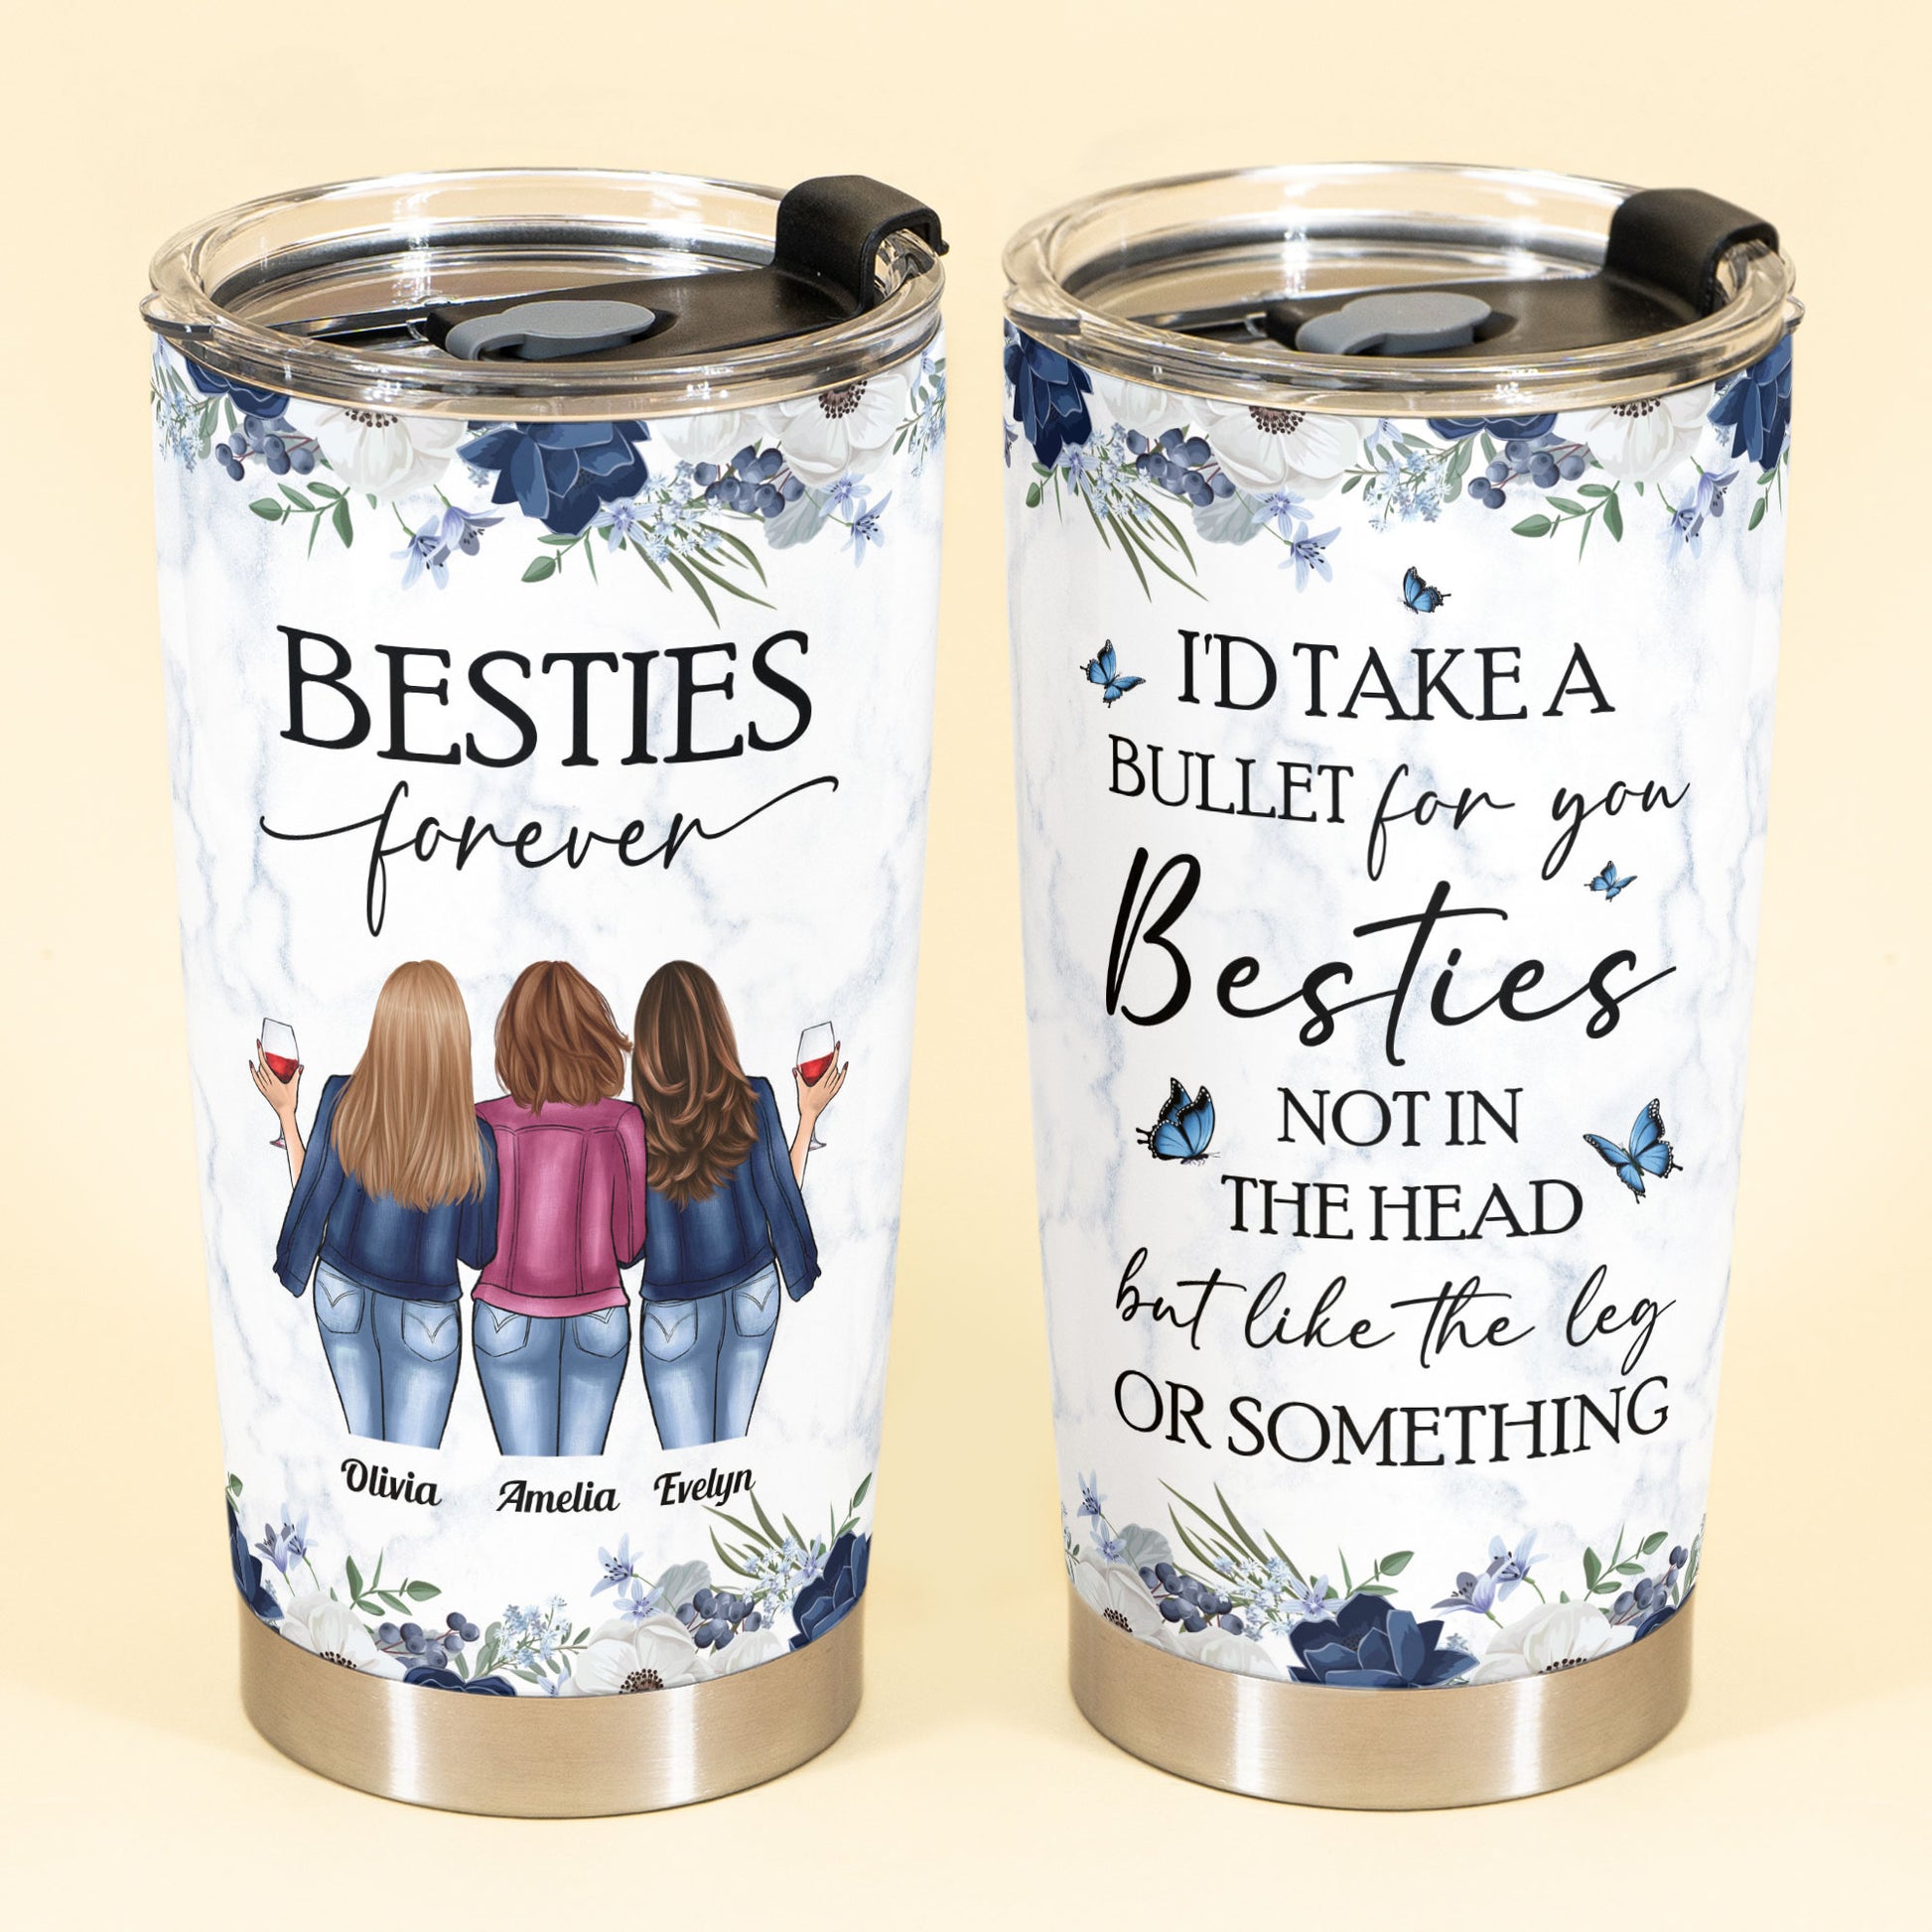 I'd Take A Bullet For You - Personalized Tumbler Cup - Birthday